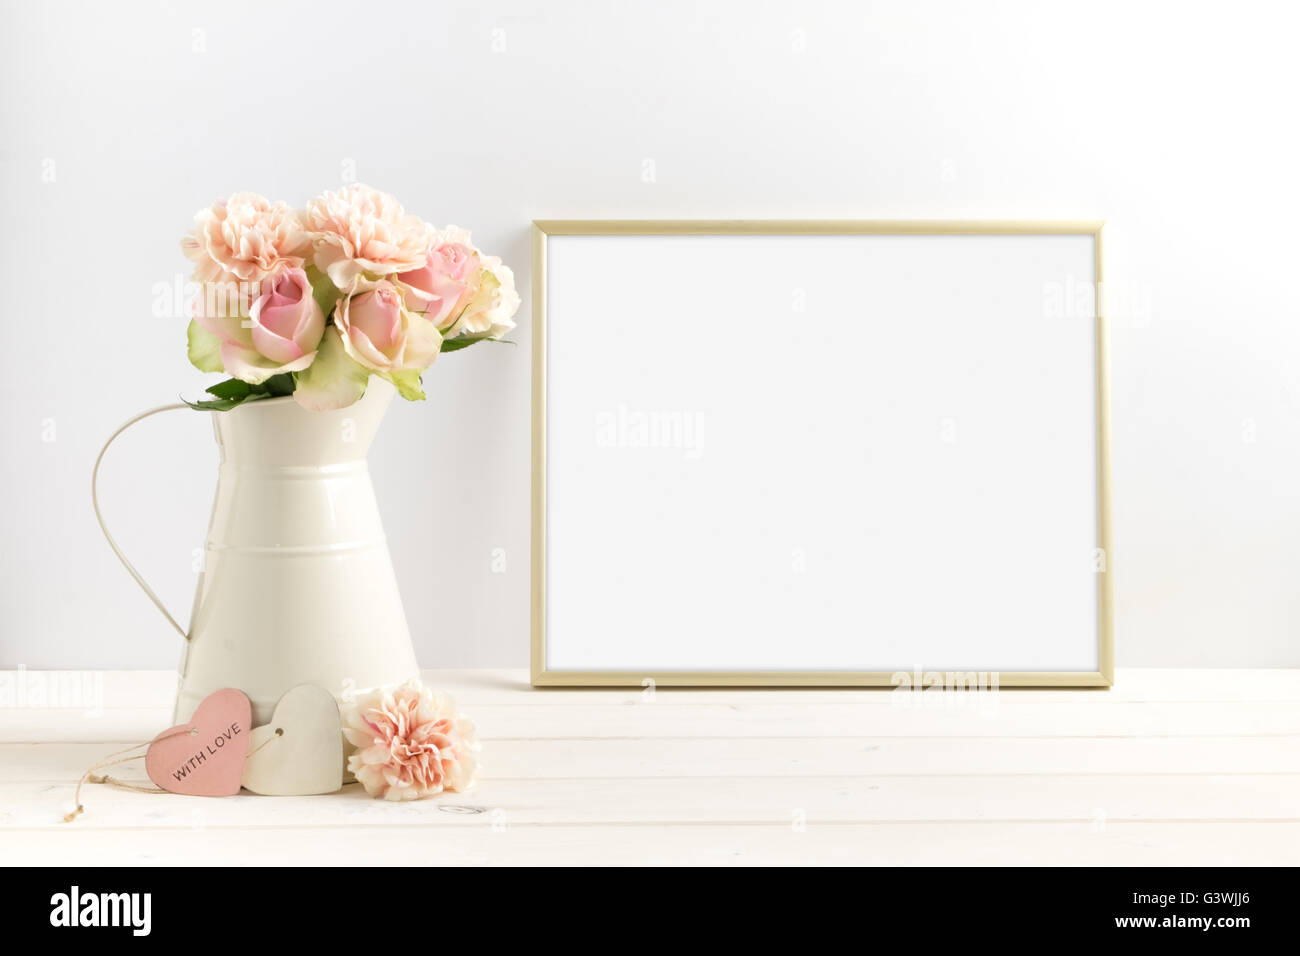 Mockup styled stock photograph of cream jug of flowers next to a Gold frame. You can place your business promotion, blog title, Stock Photo